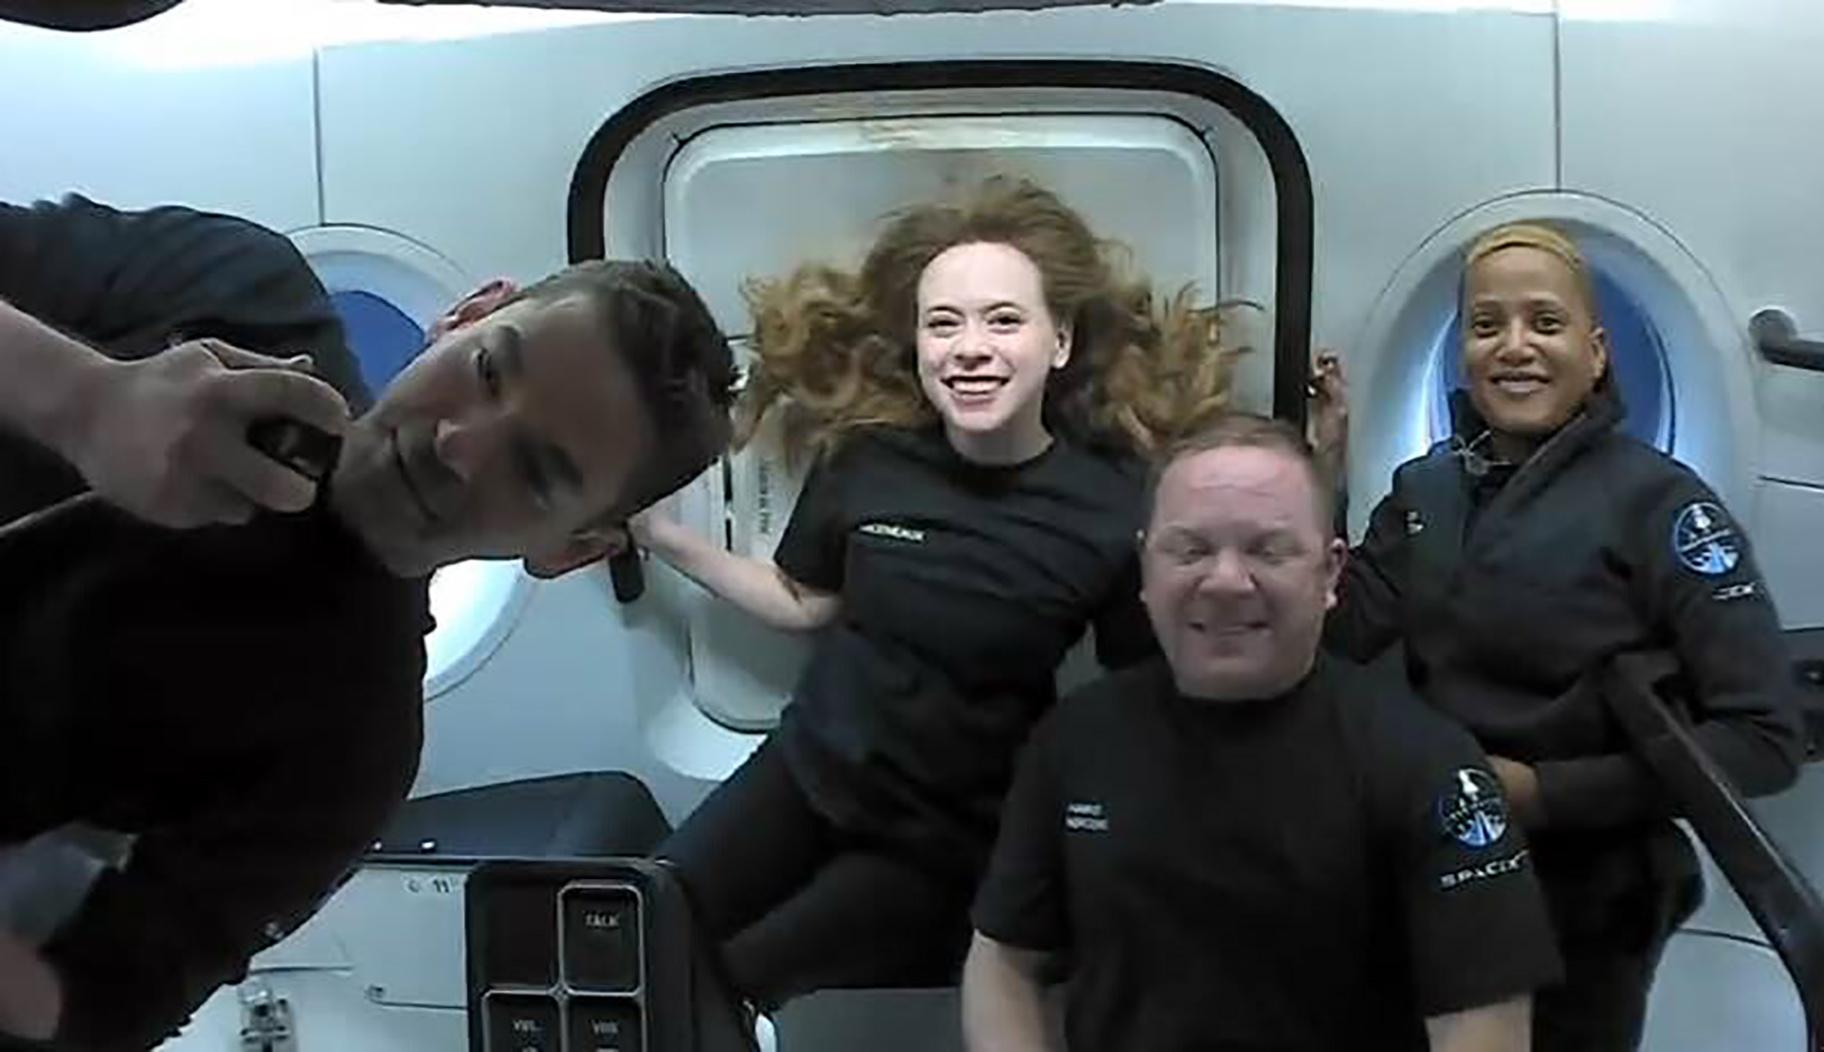 This photo provided by SpaceX shows the passengers of Inspiration4 in the Dragon capsule on their first day in space. They are, from left, Jared Isaacman, Hayley Arceneaux, Chris Sembroski and Sian Proctor. (SpaceX via AP)